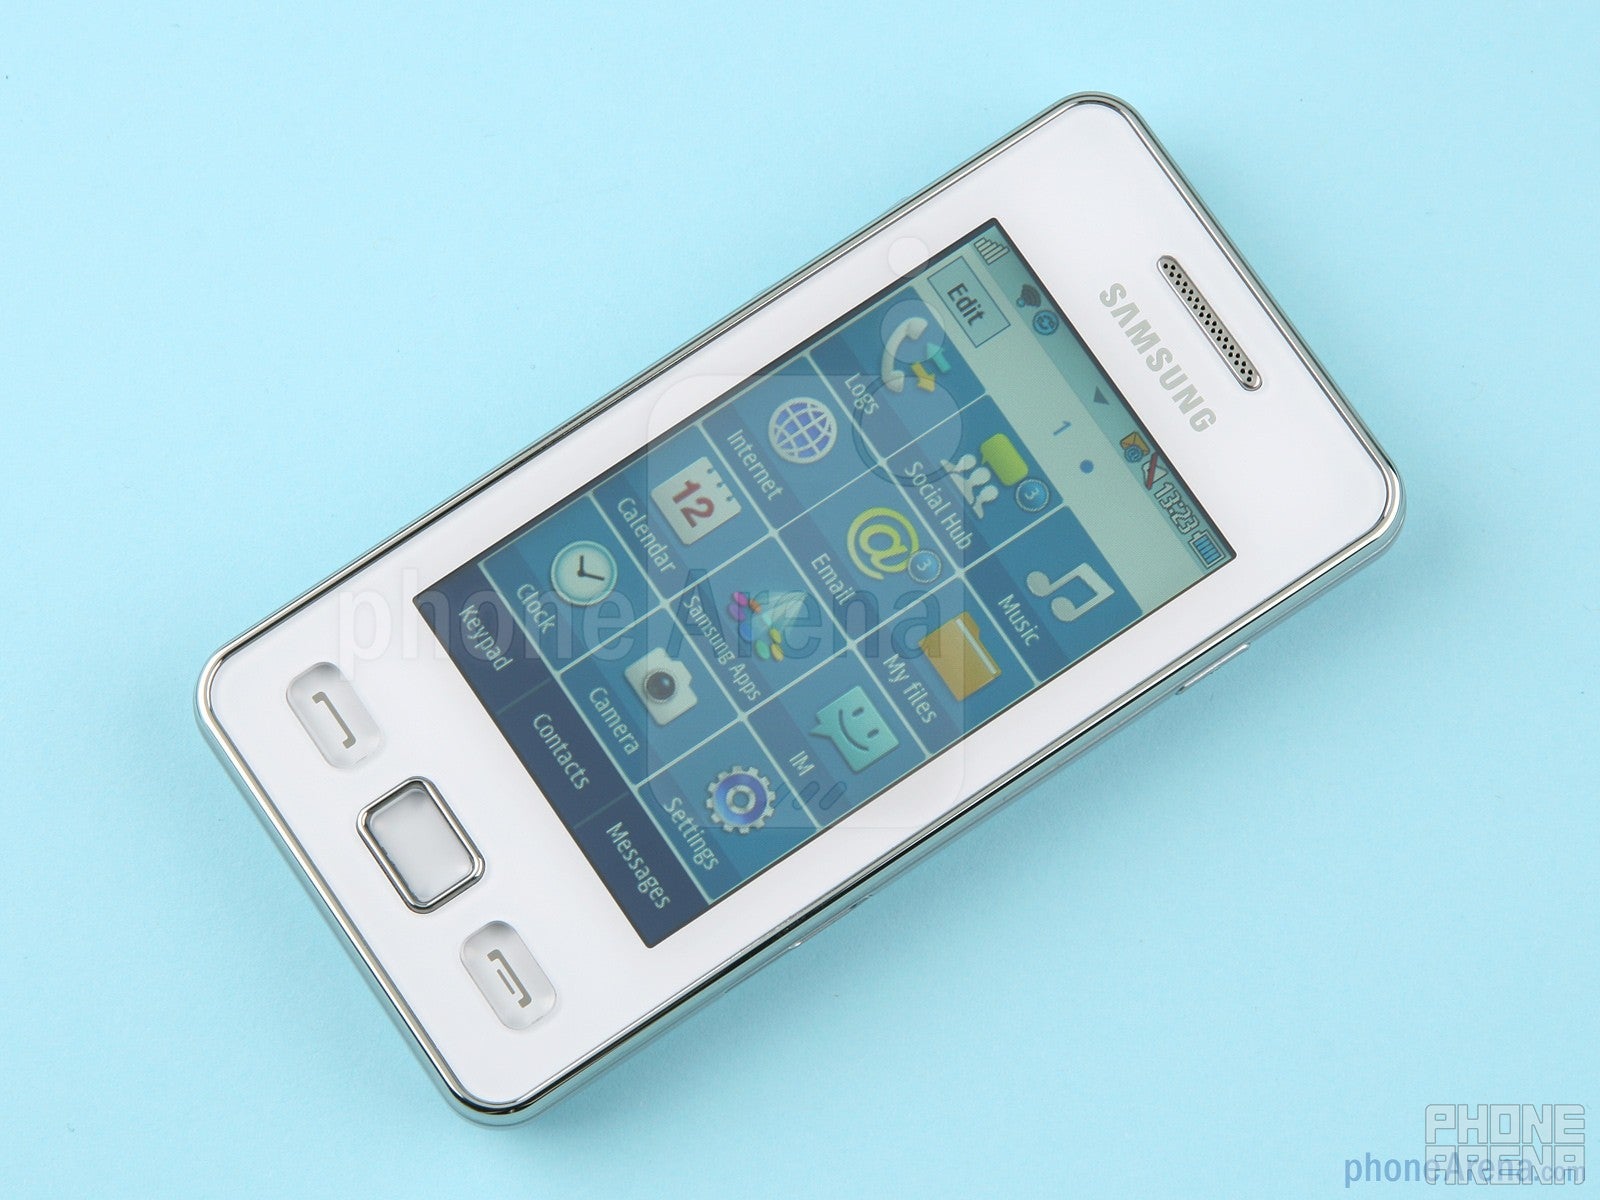 The Star II has a 3.0-inch touchscreen - Samsung Star II Preview